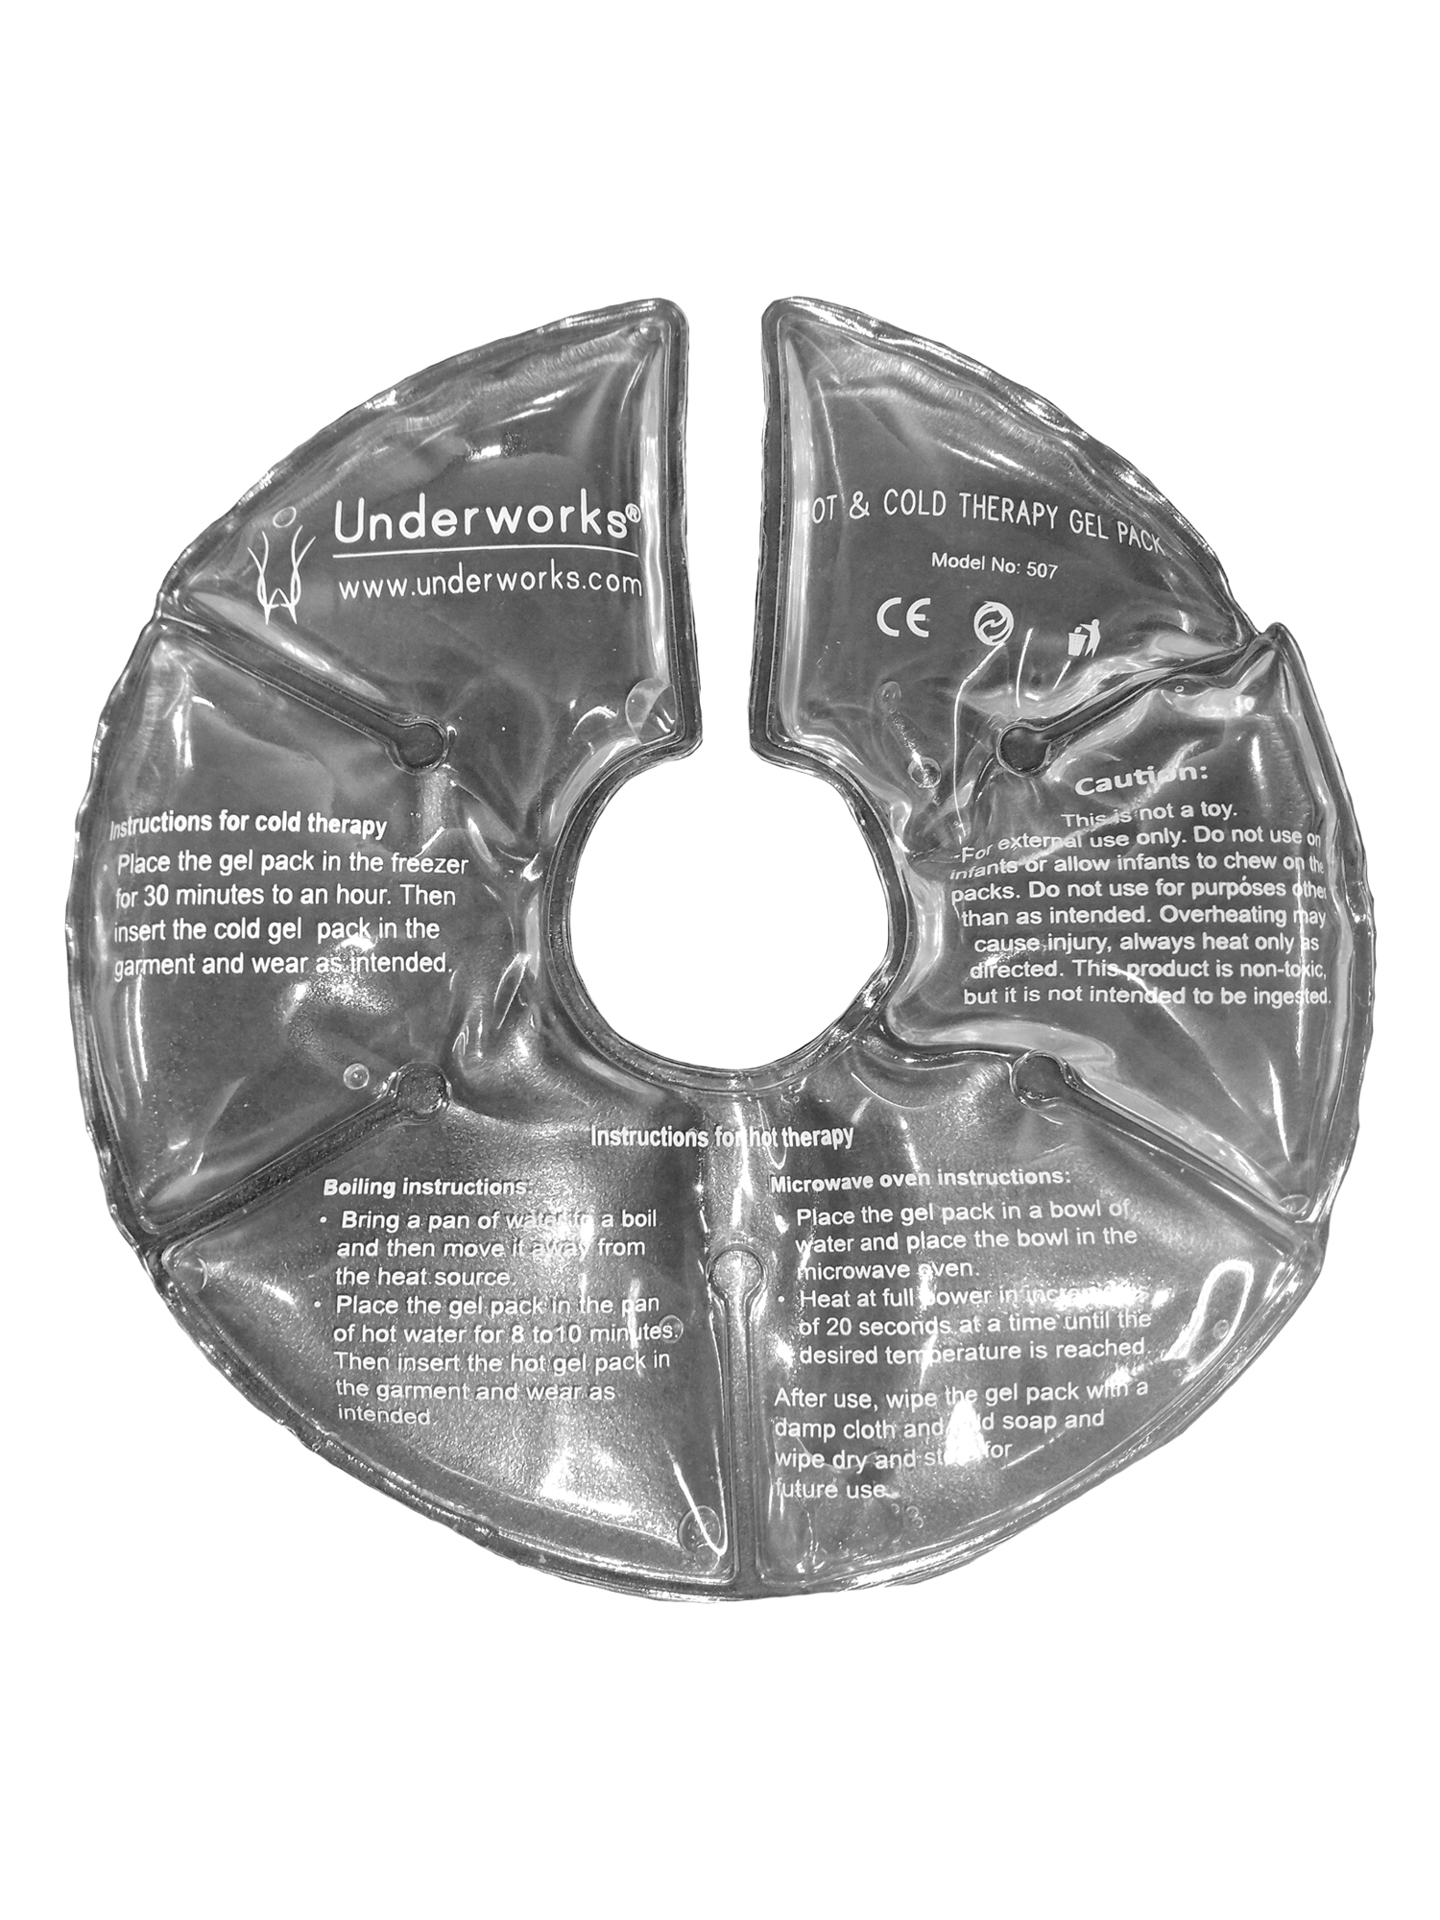 Underworks Reusable Breast Therapy Hot & Cold Gel Pad